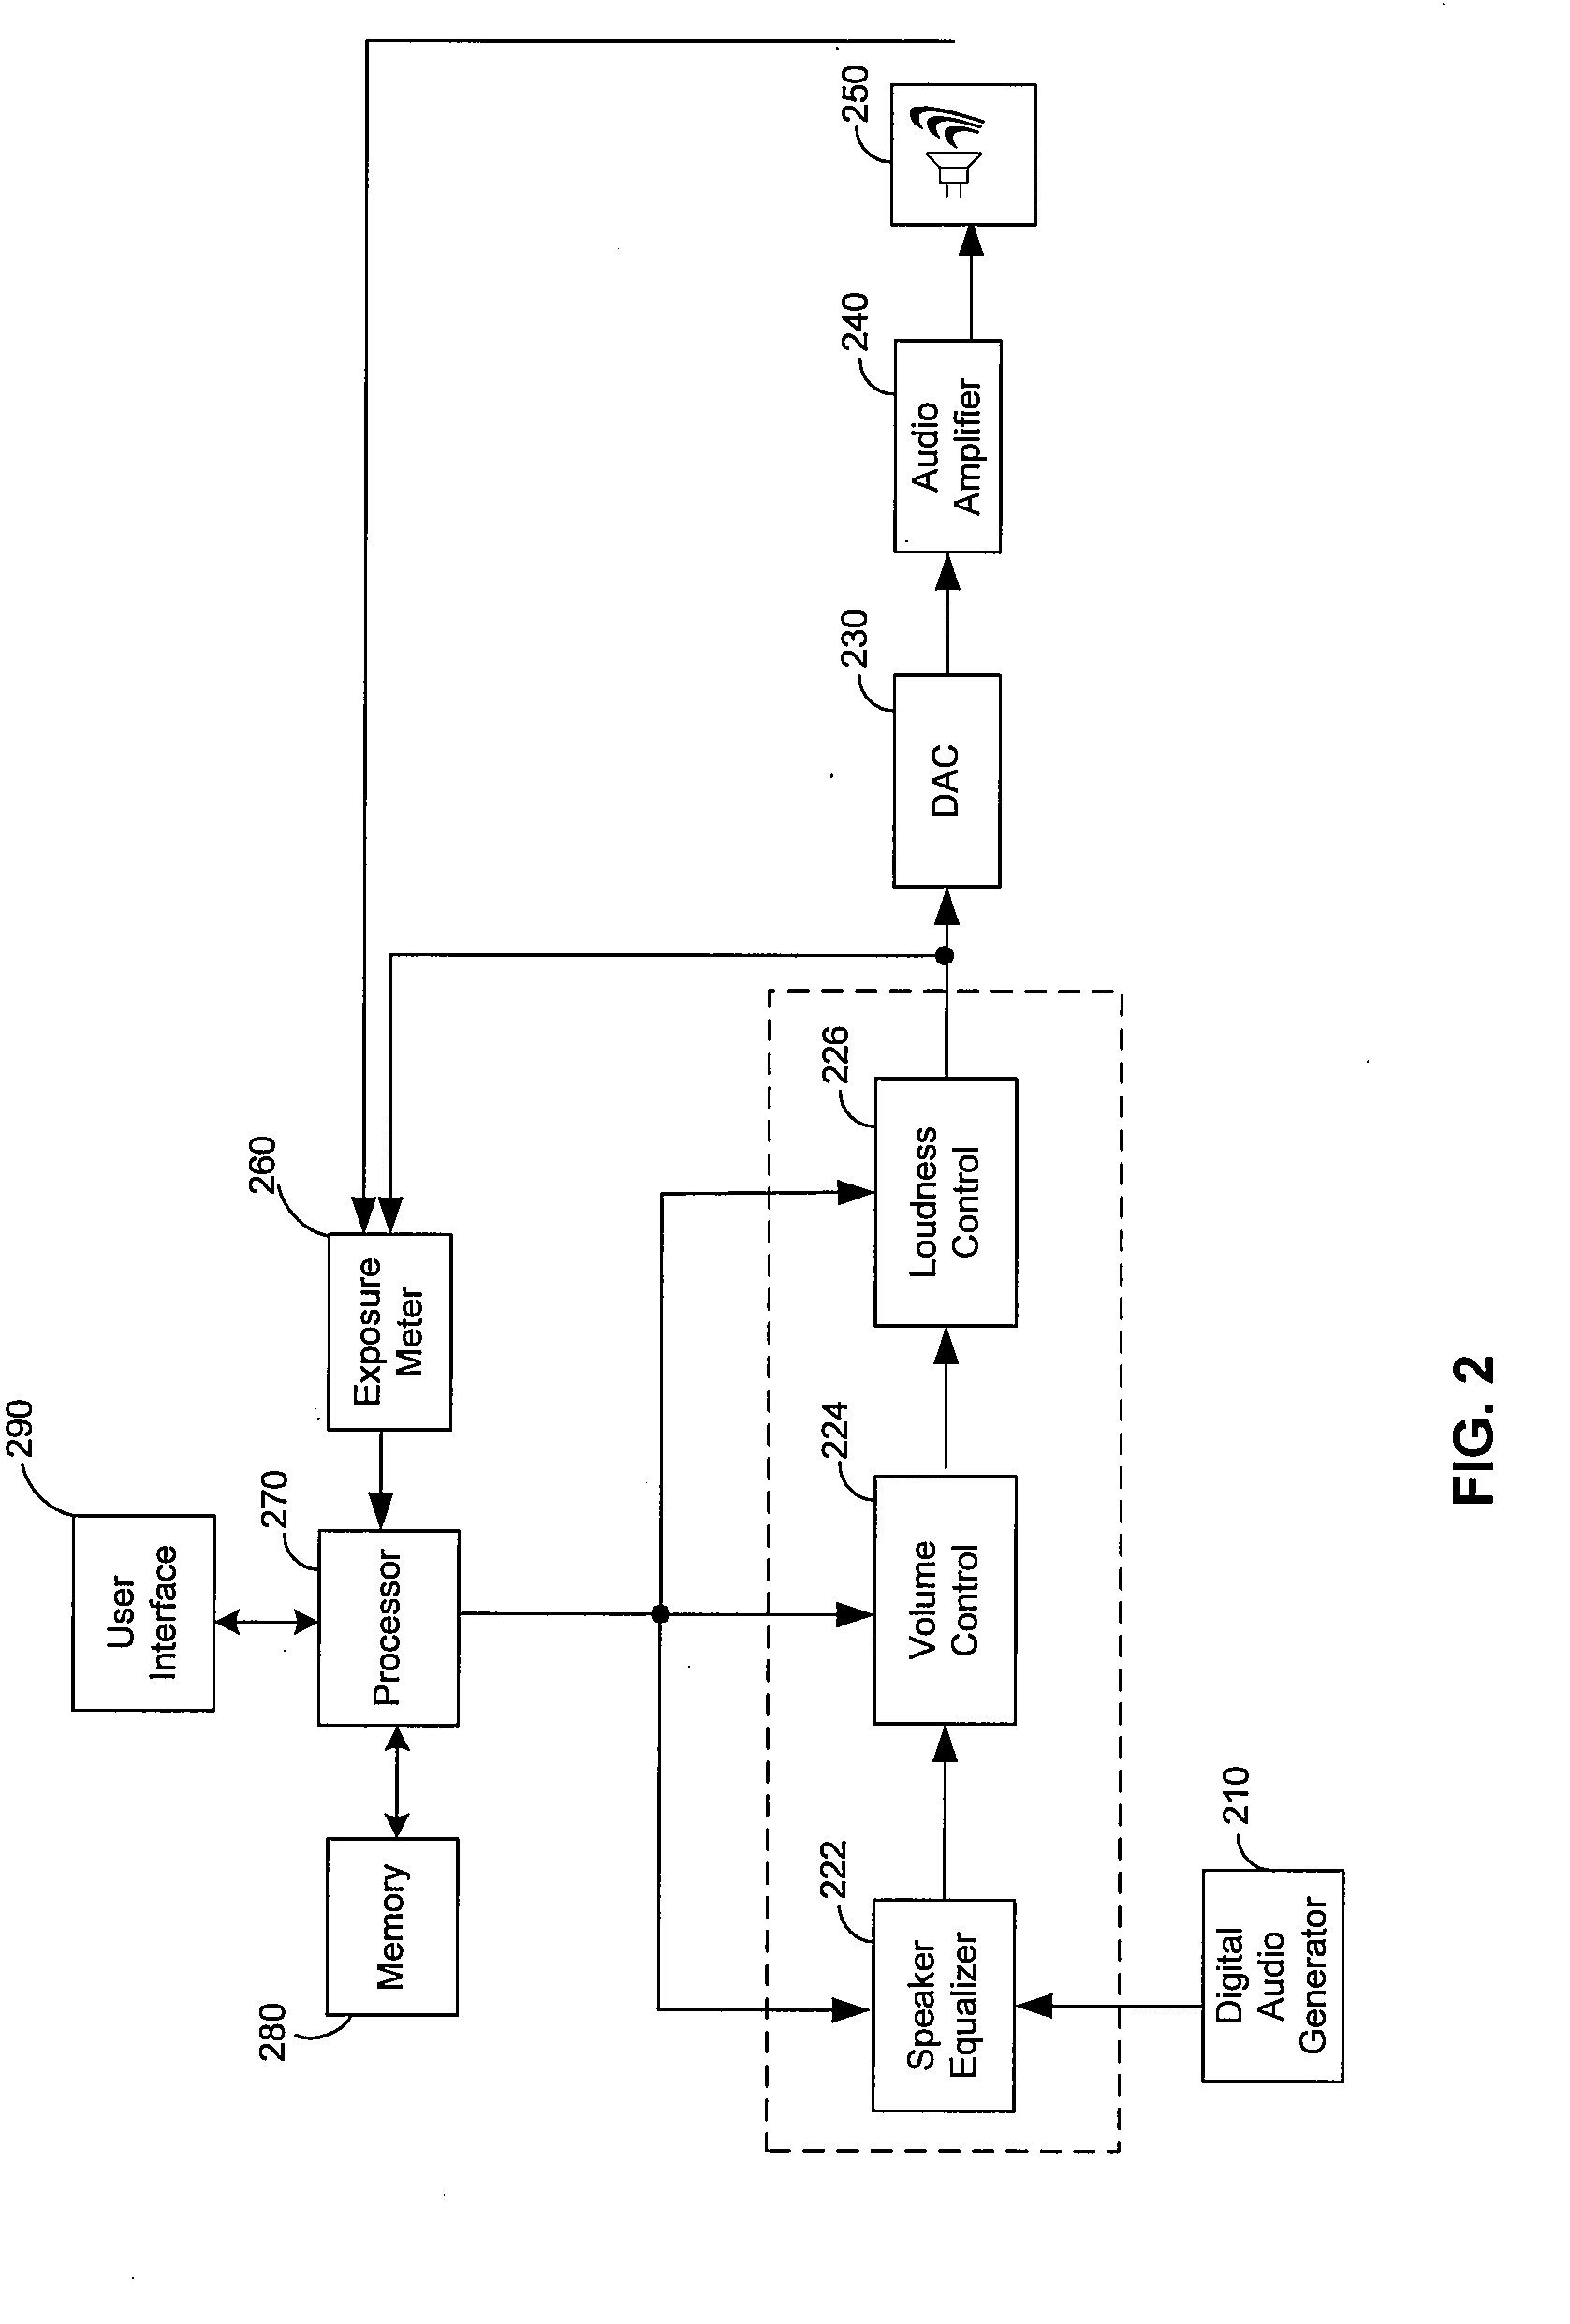 Method and system for limiting audio output in audio headsets